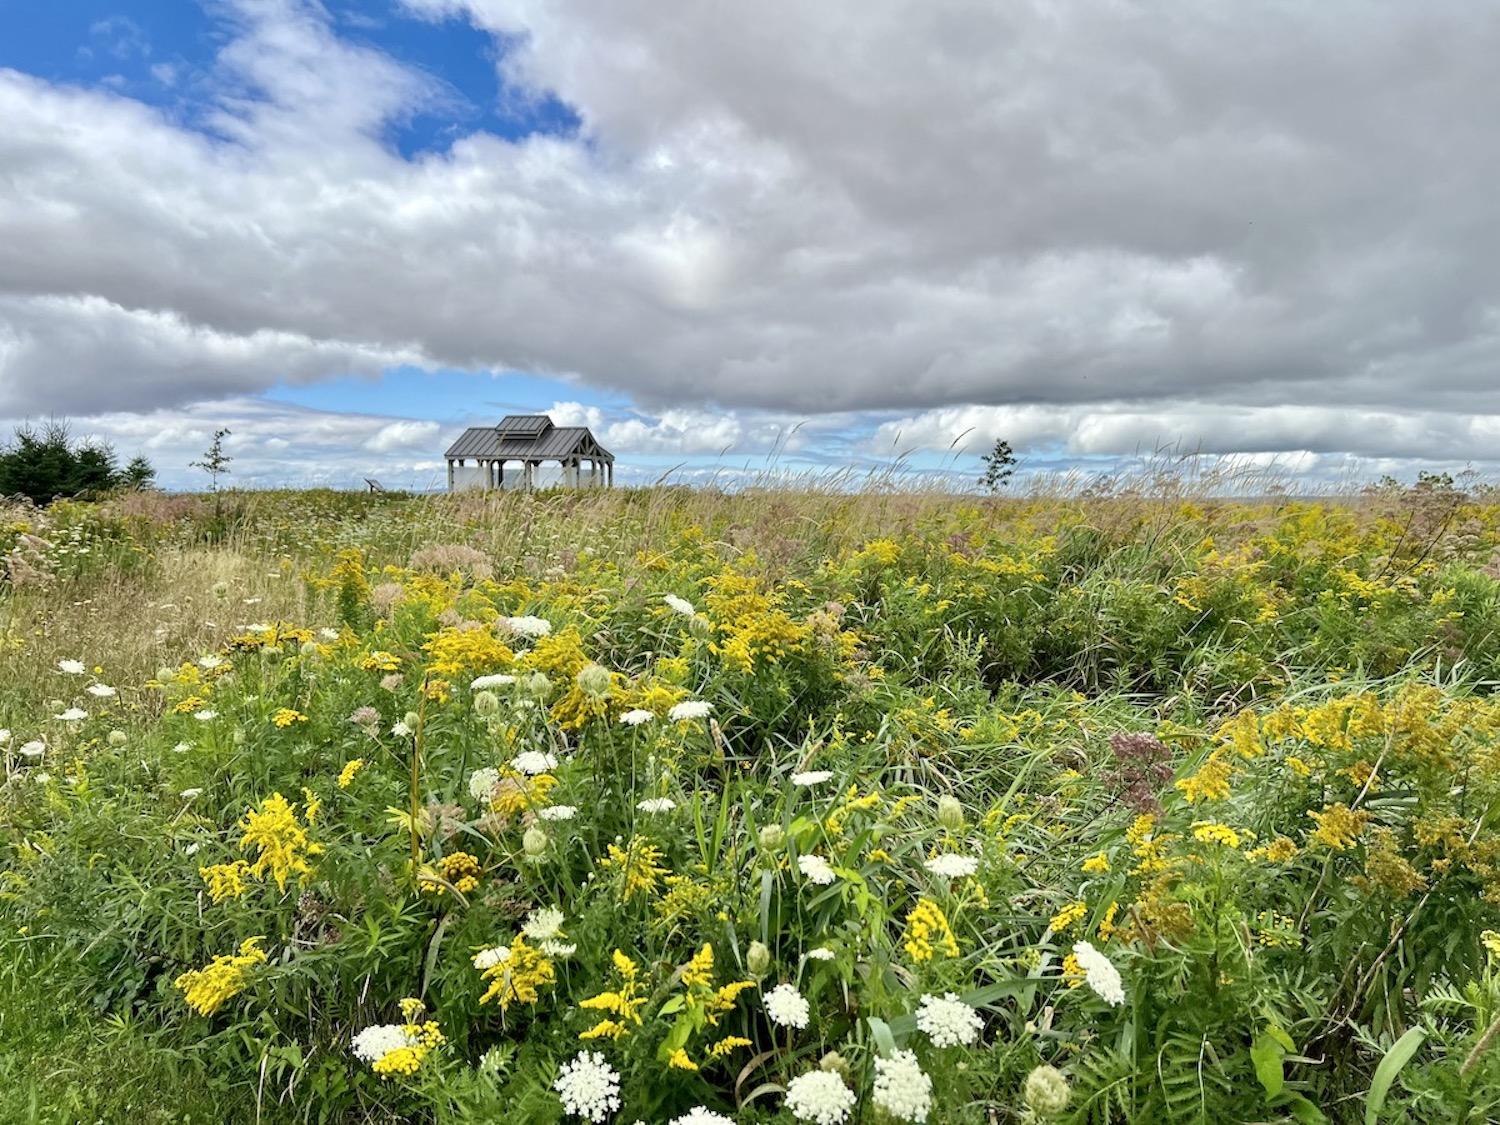 A picnic shelter along a flower-filled path is the highlight of Beaubassin and Fort Lawrence National Historic Sites.